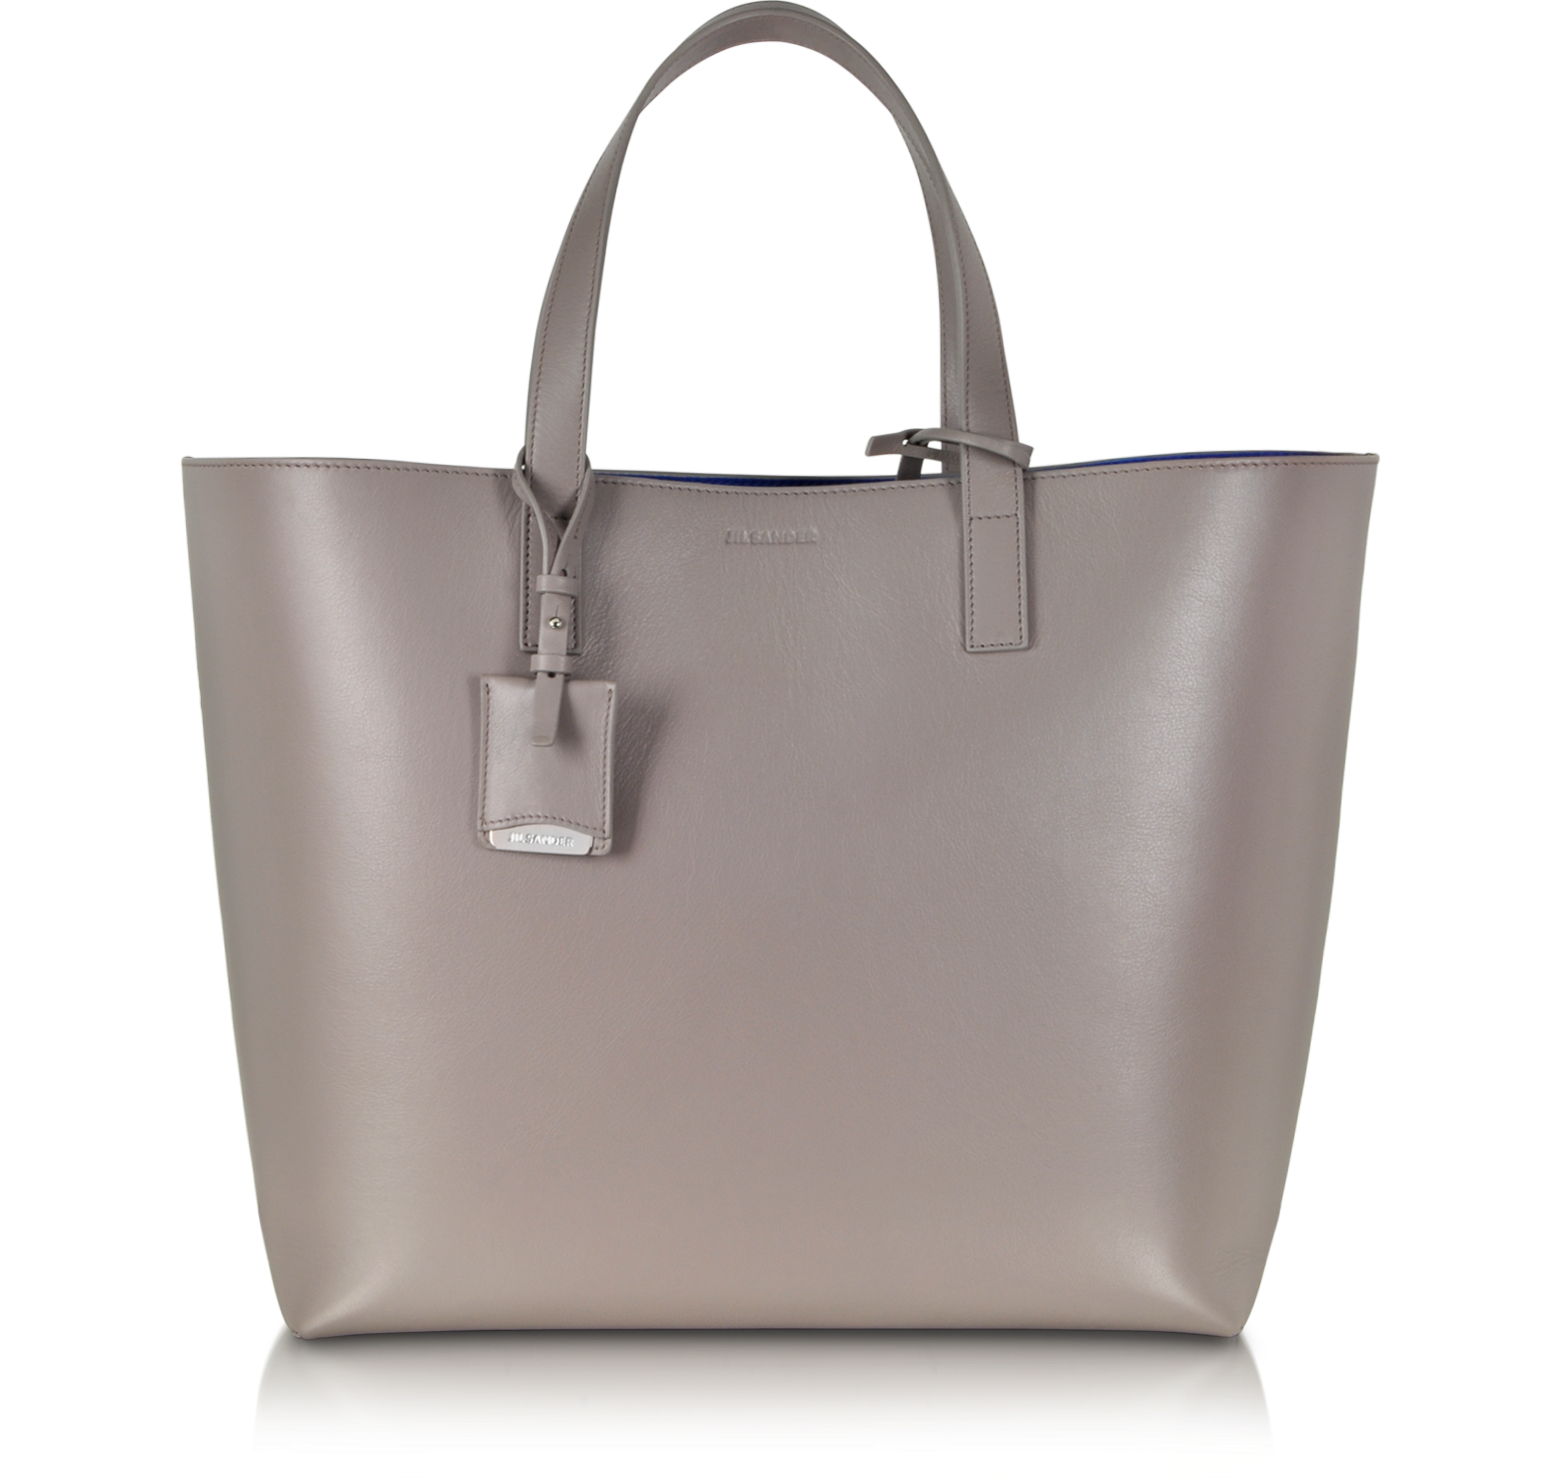 Jil Sander Beige Large Ibiza Leather Tote at FORZIERI